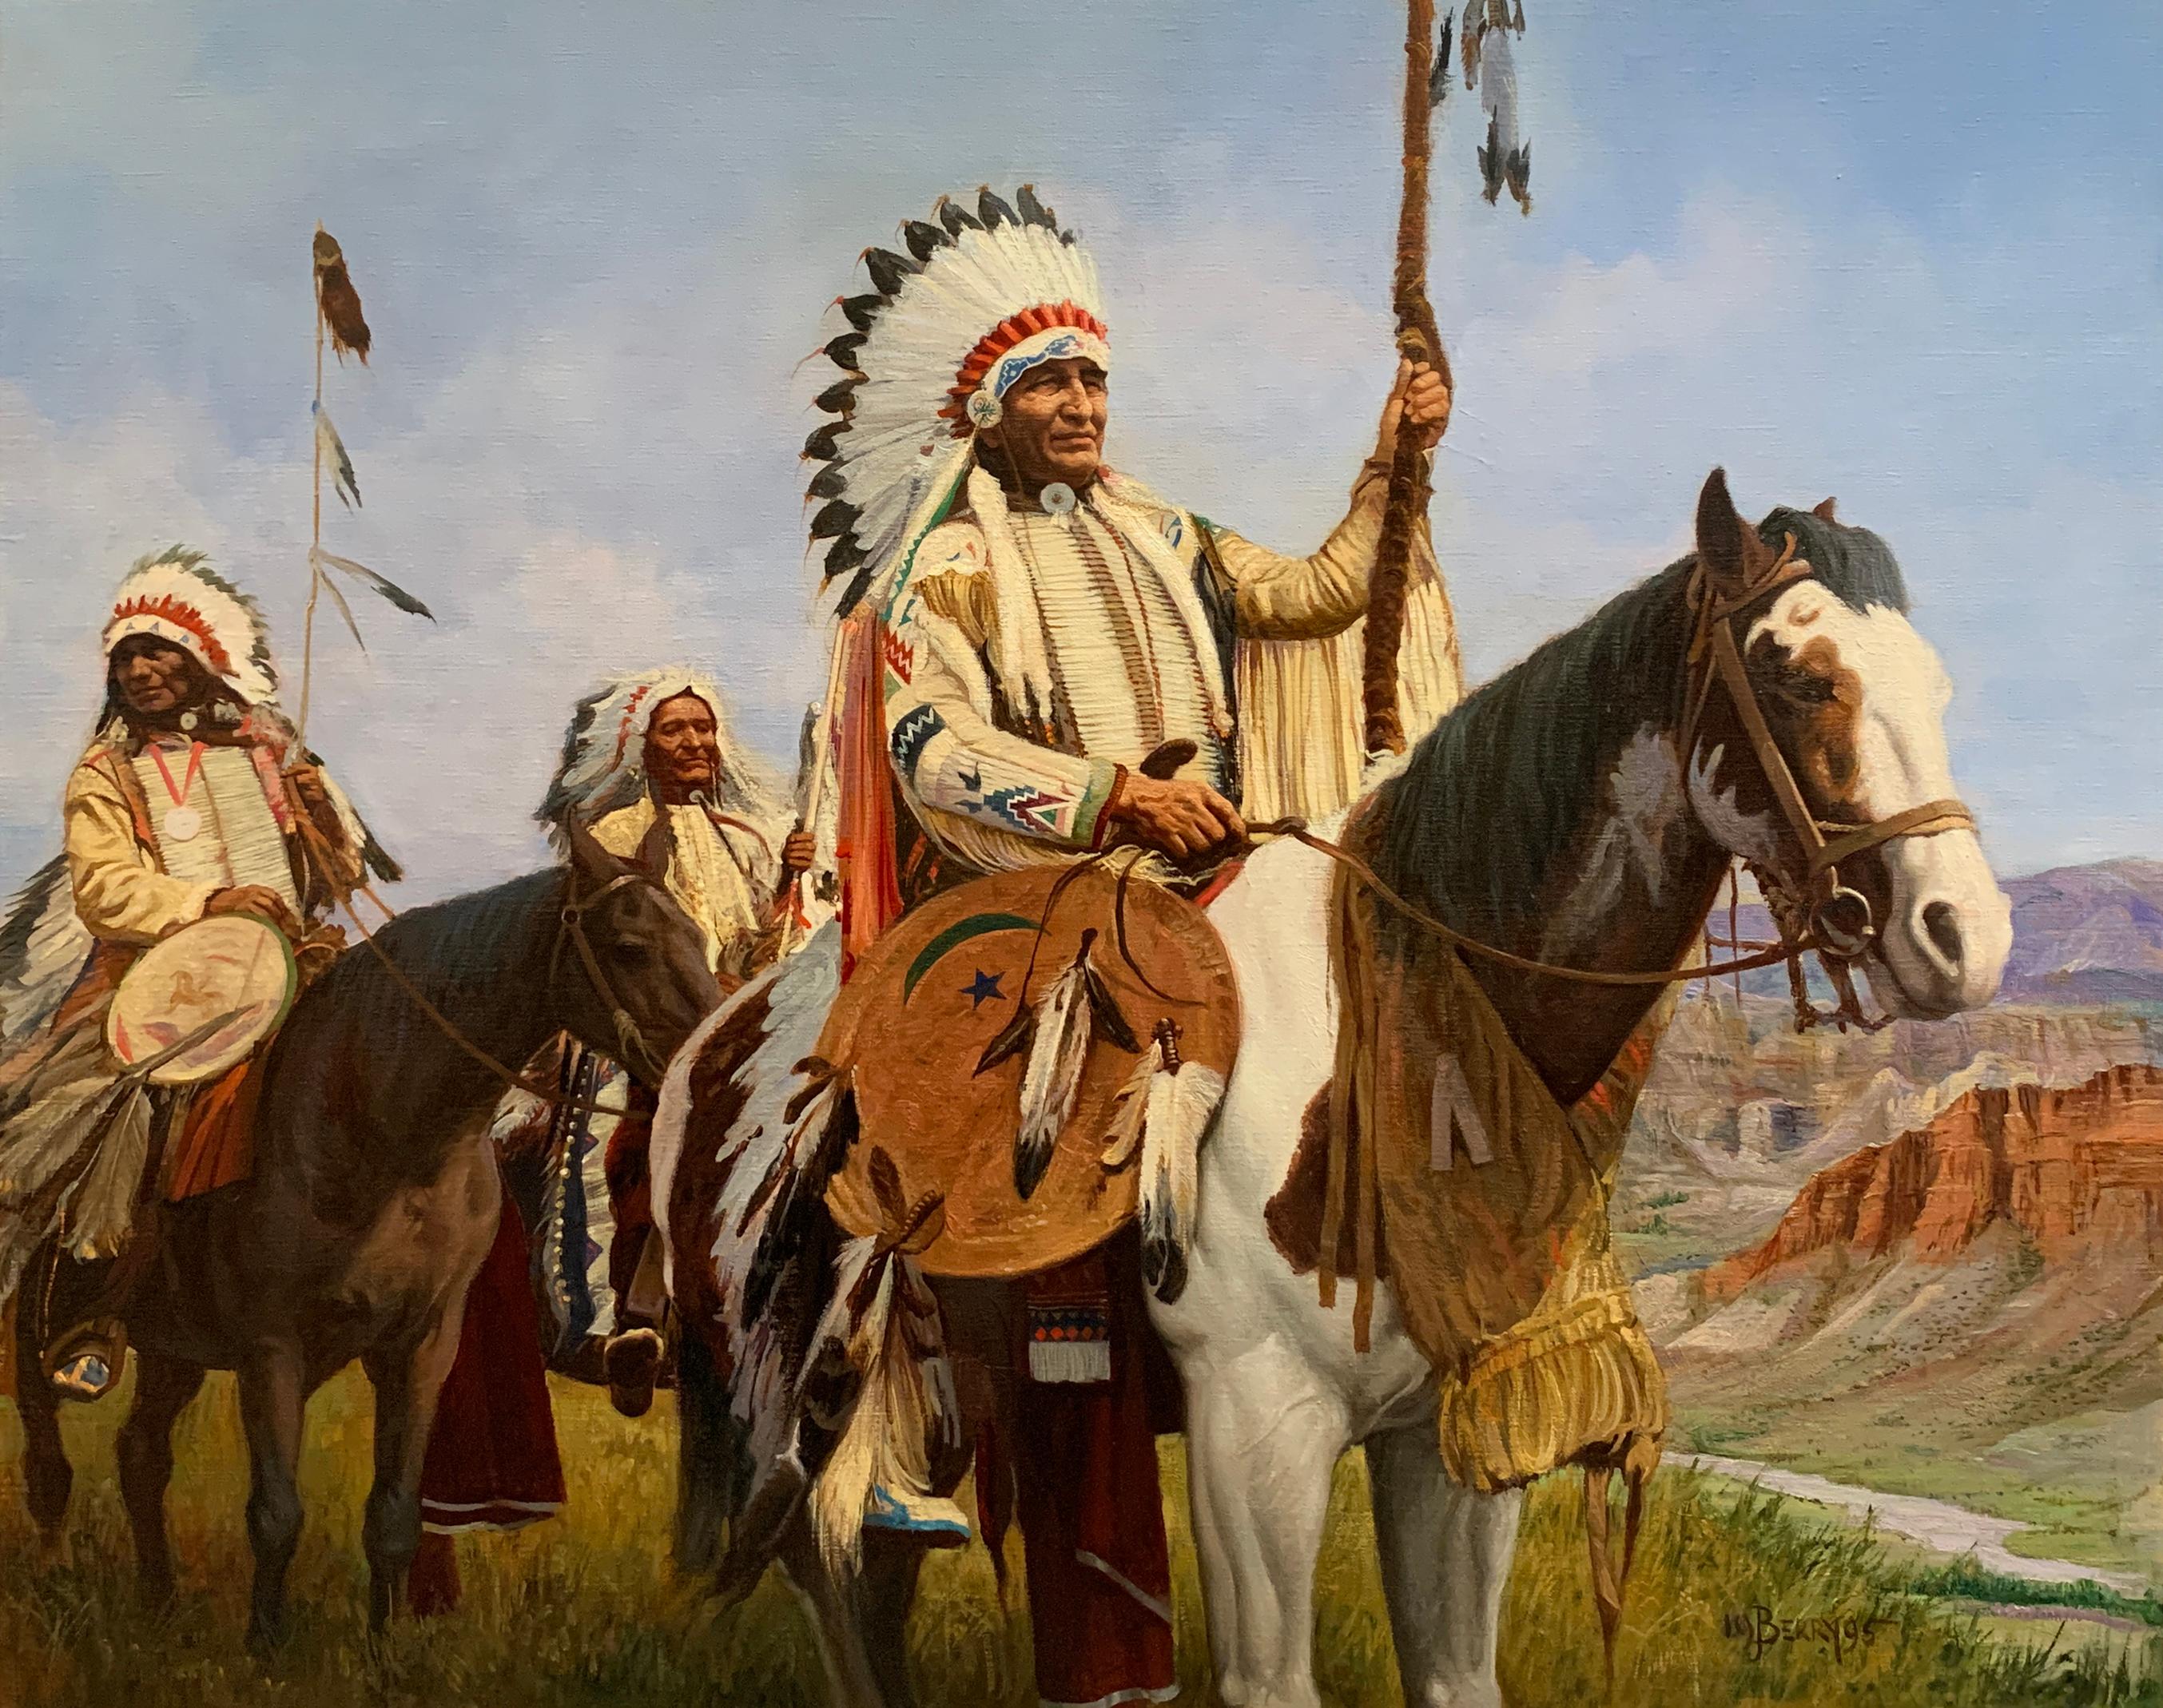 "Wealth of A Nation", John Berry, Native American Indians, Oil/Canvas, 30x36 in.